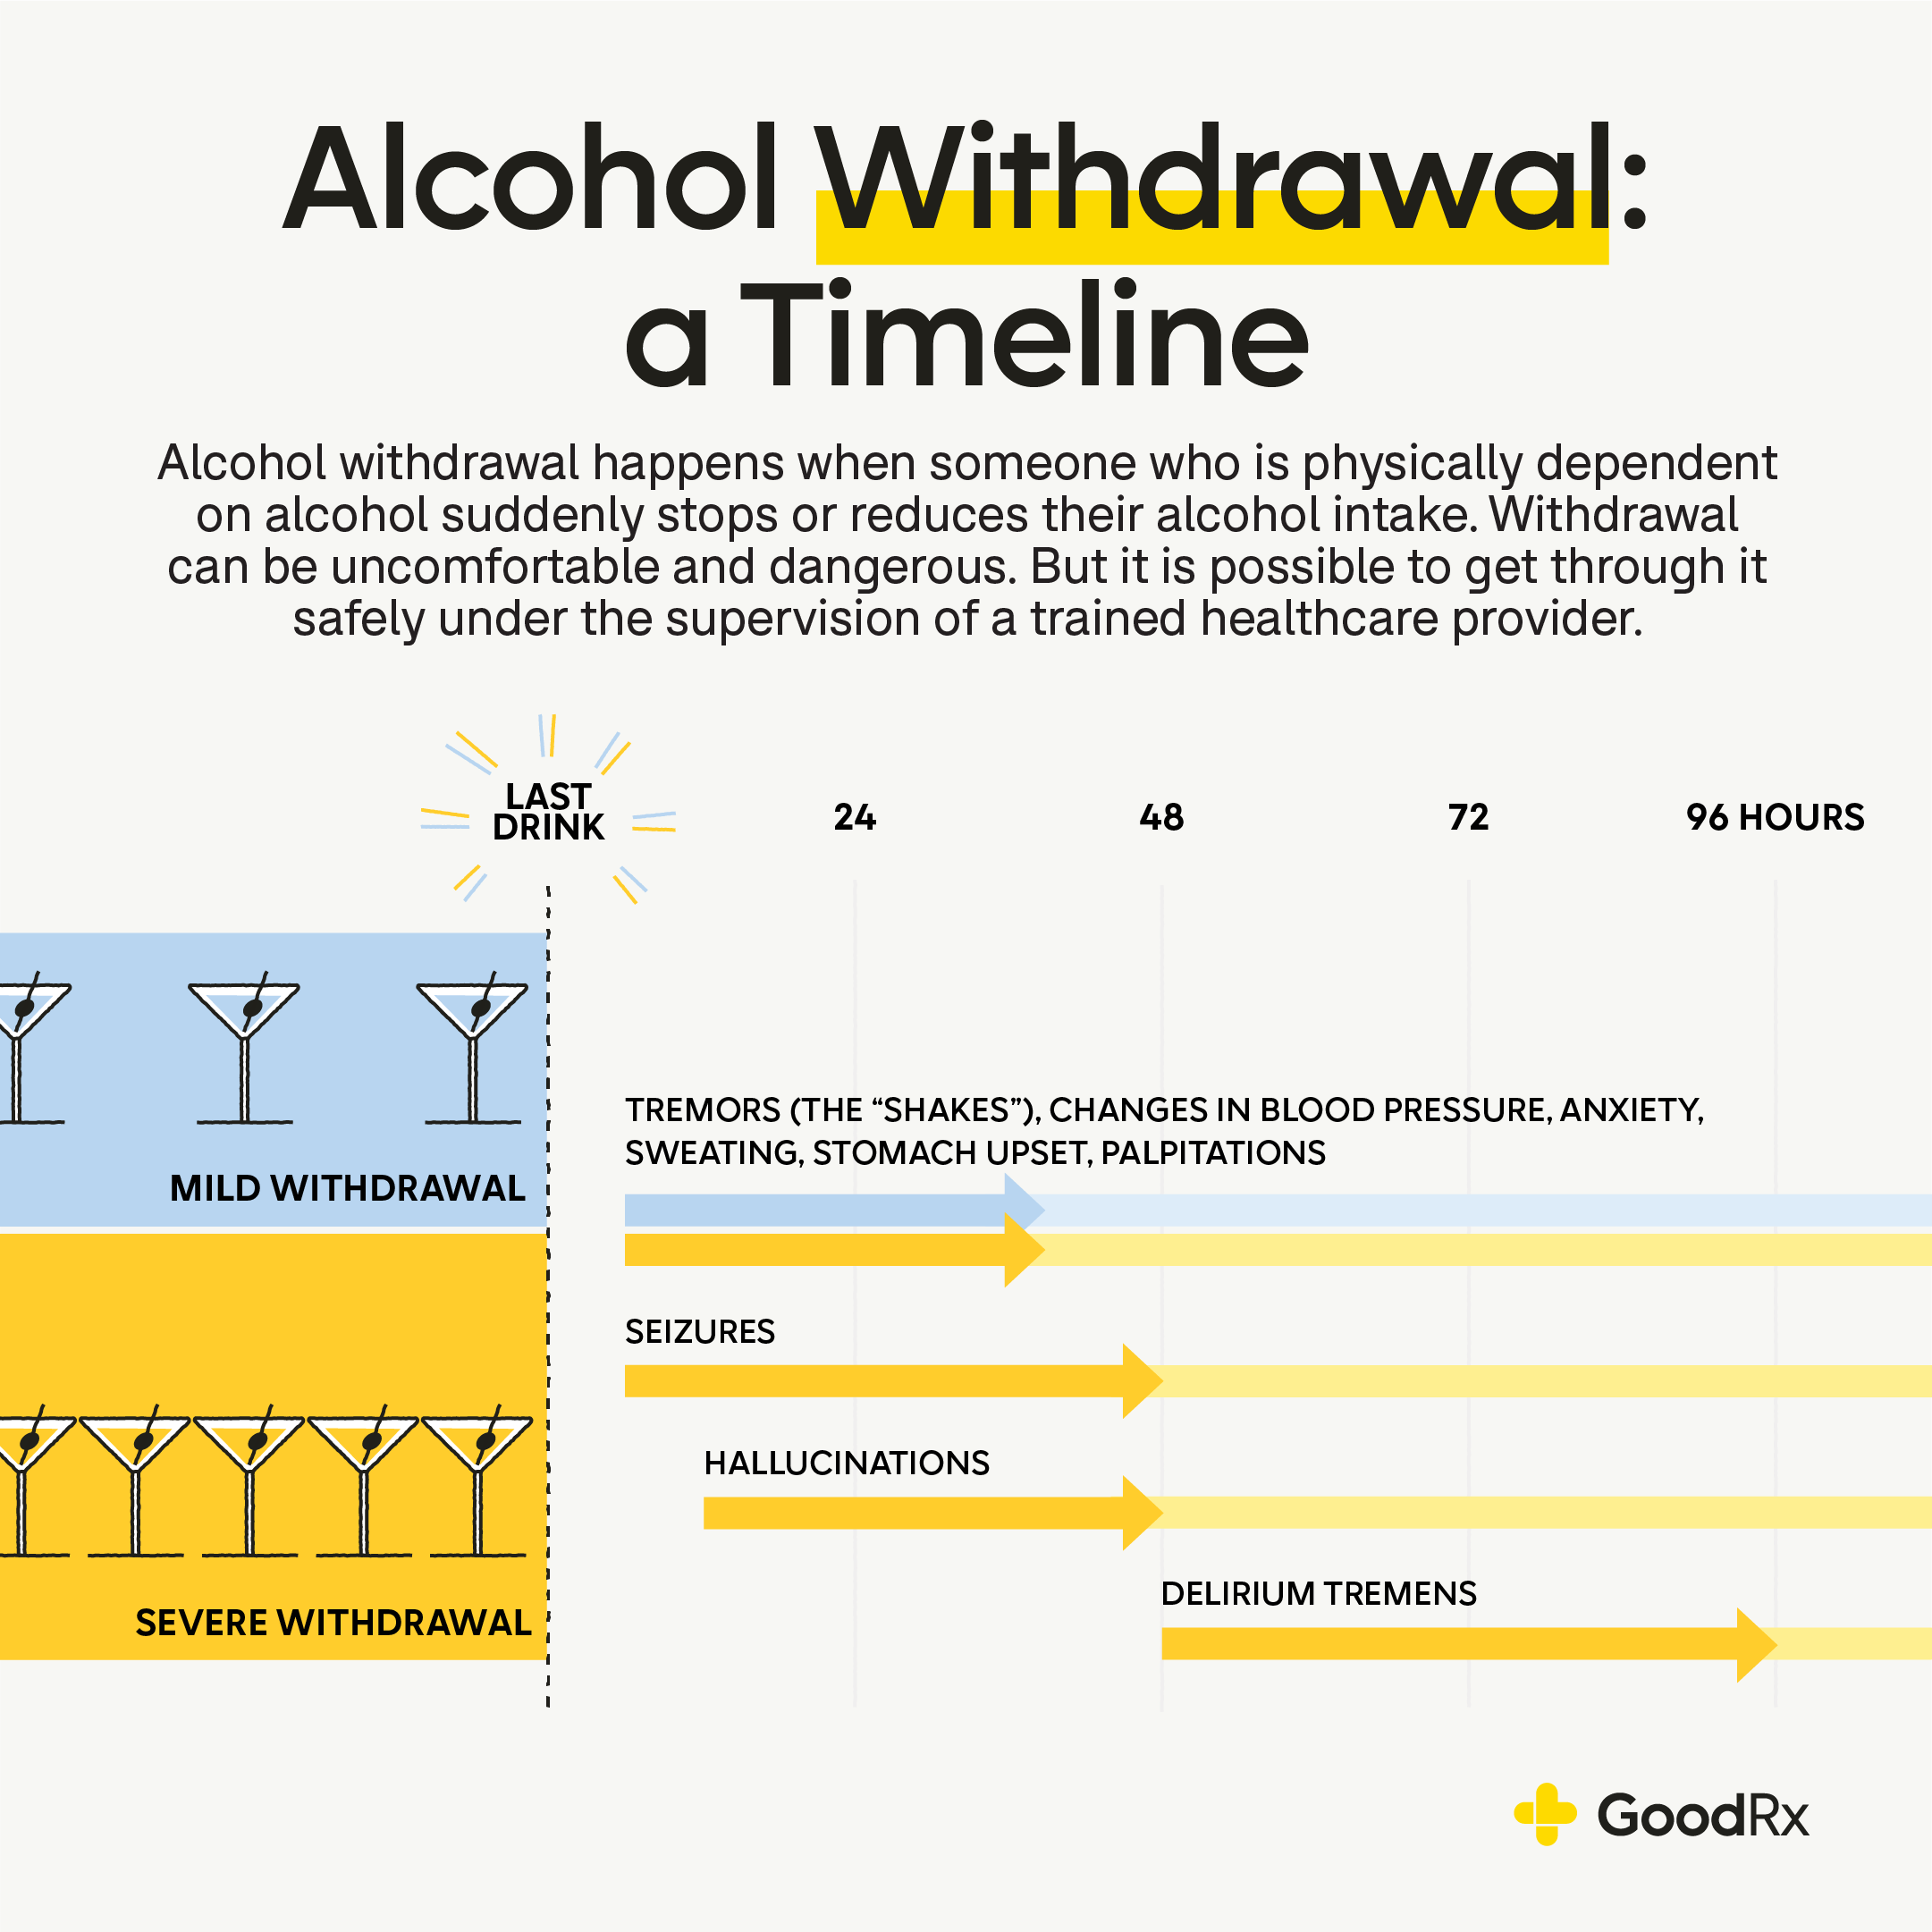 Does Alcohol Withdrawal Cause High Blood Pressure?